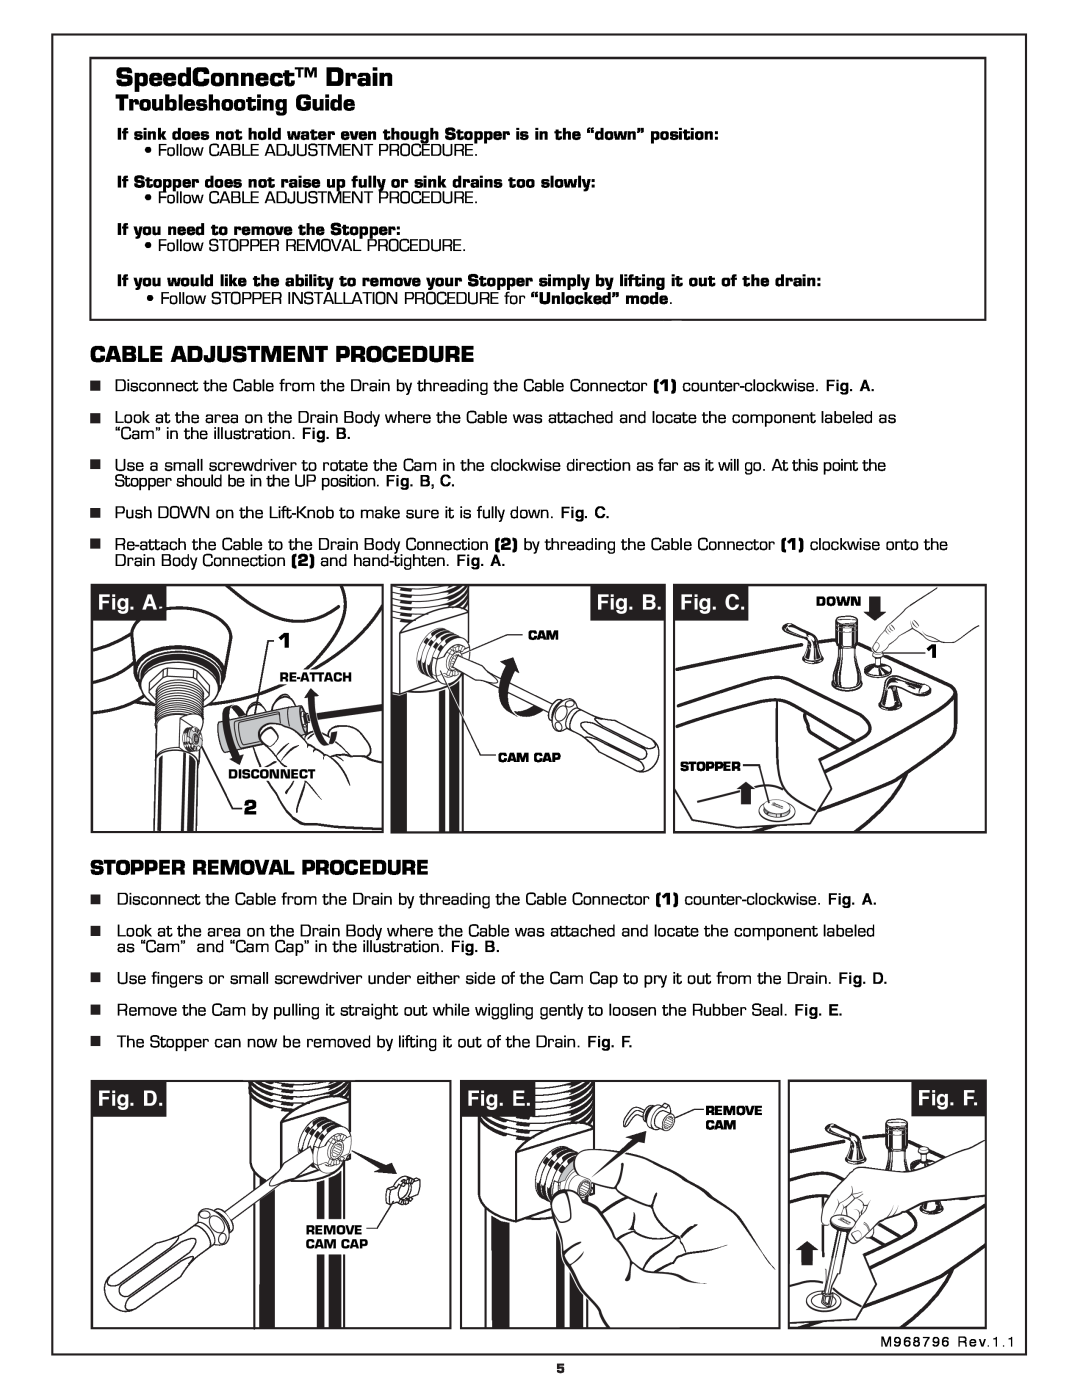 American Standard 3475.501 Troubleshooting Guide, Cable Adjustment Procedure, Fig. A, Fig. B, Fig. C, Fig. D, Fig. E 